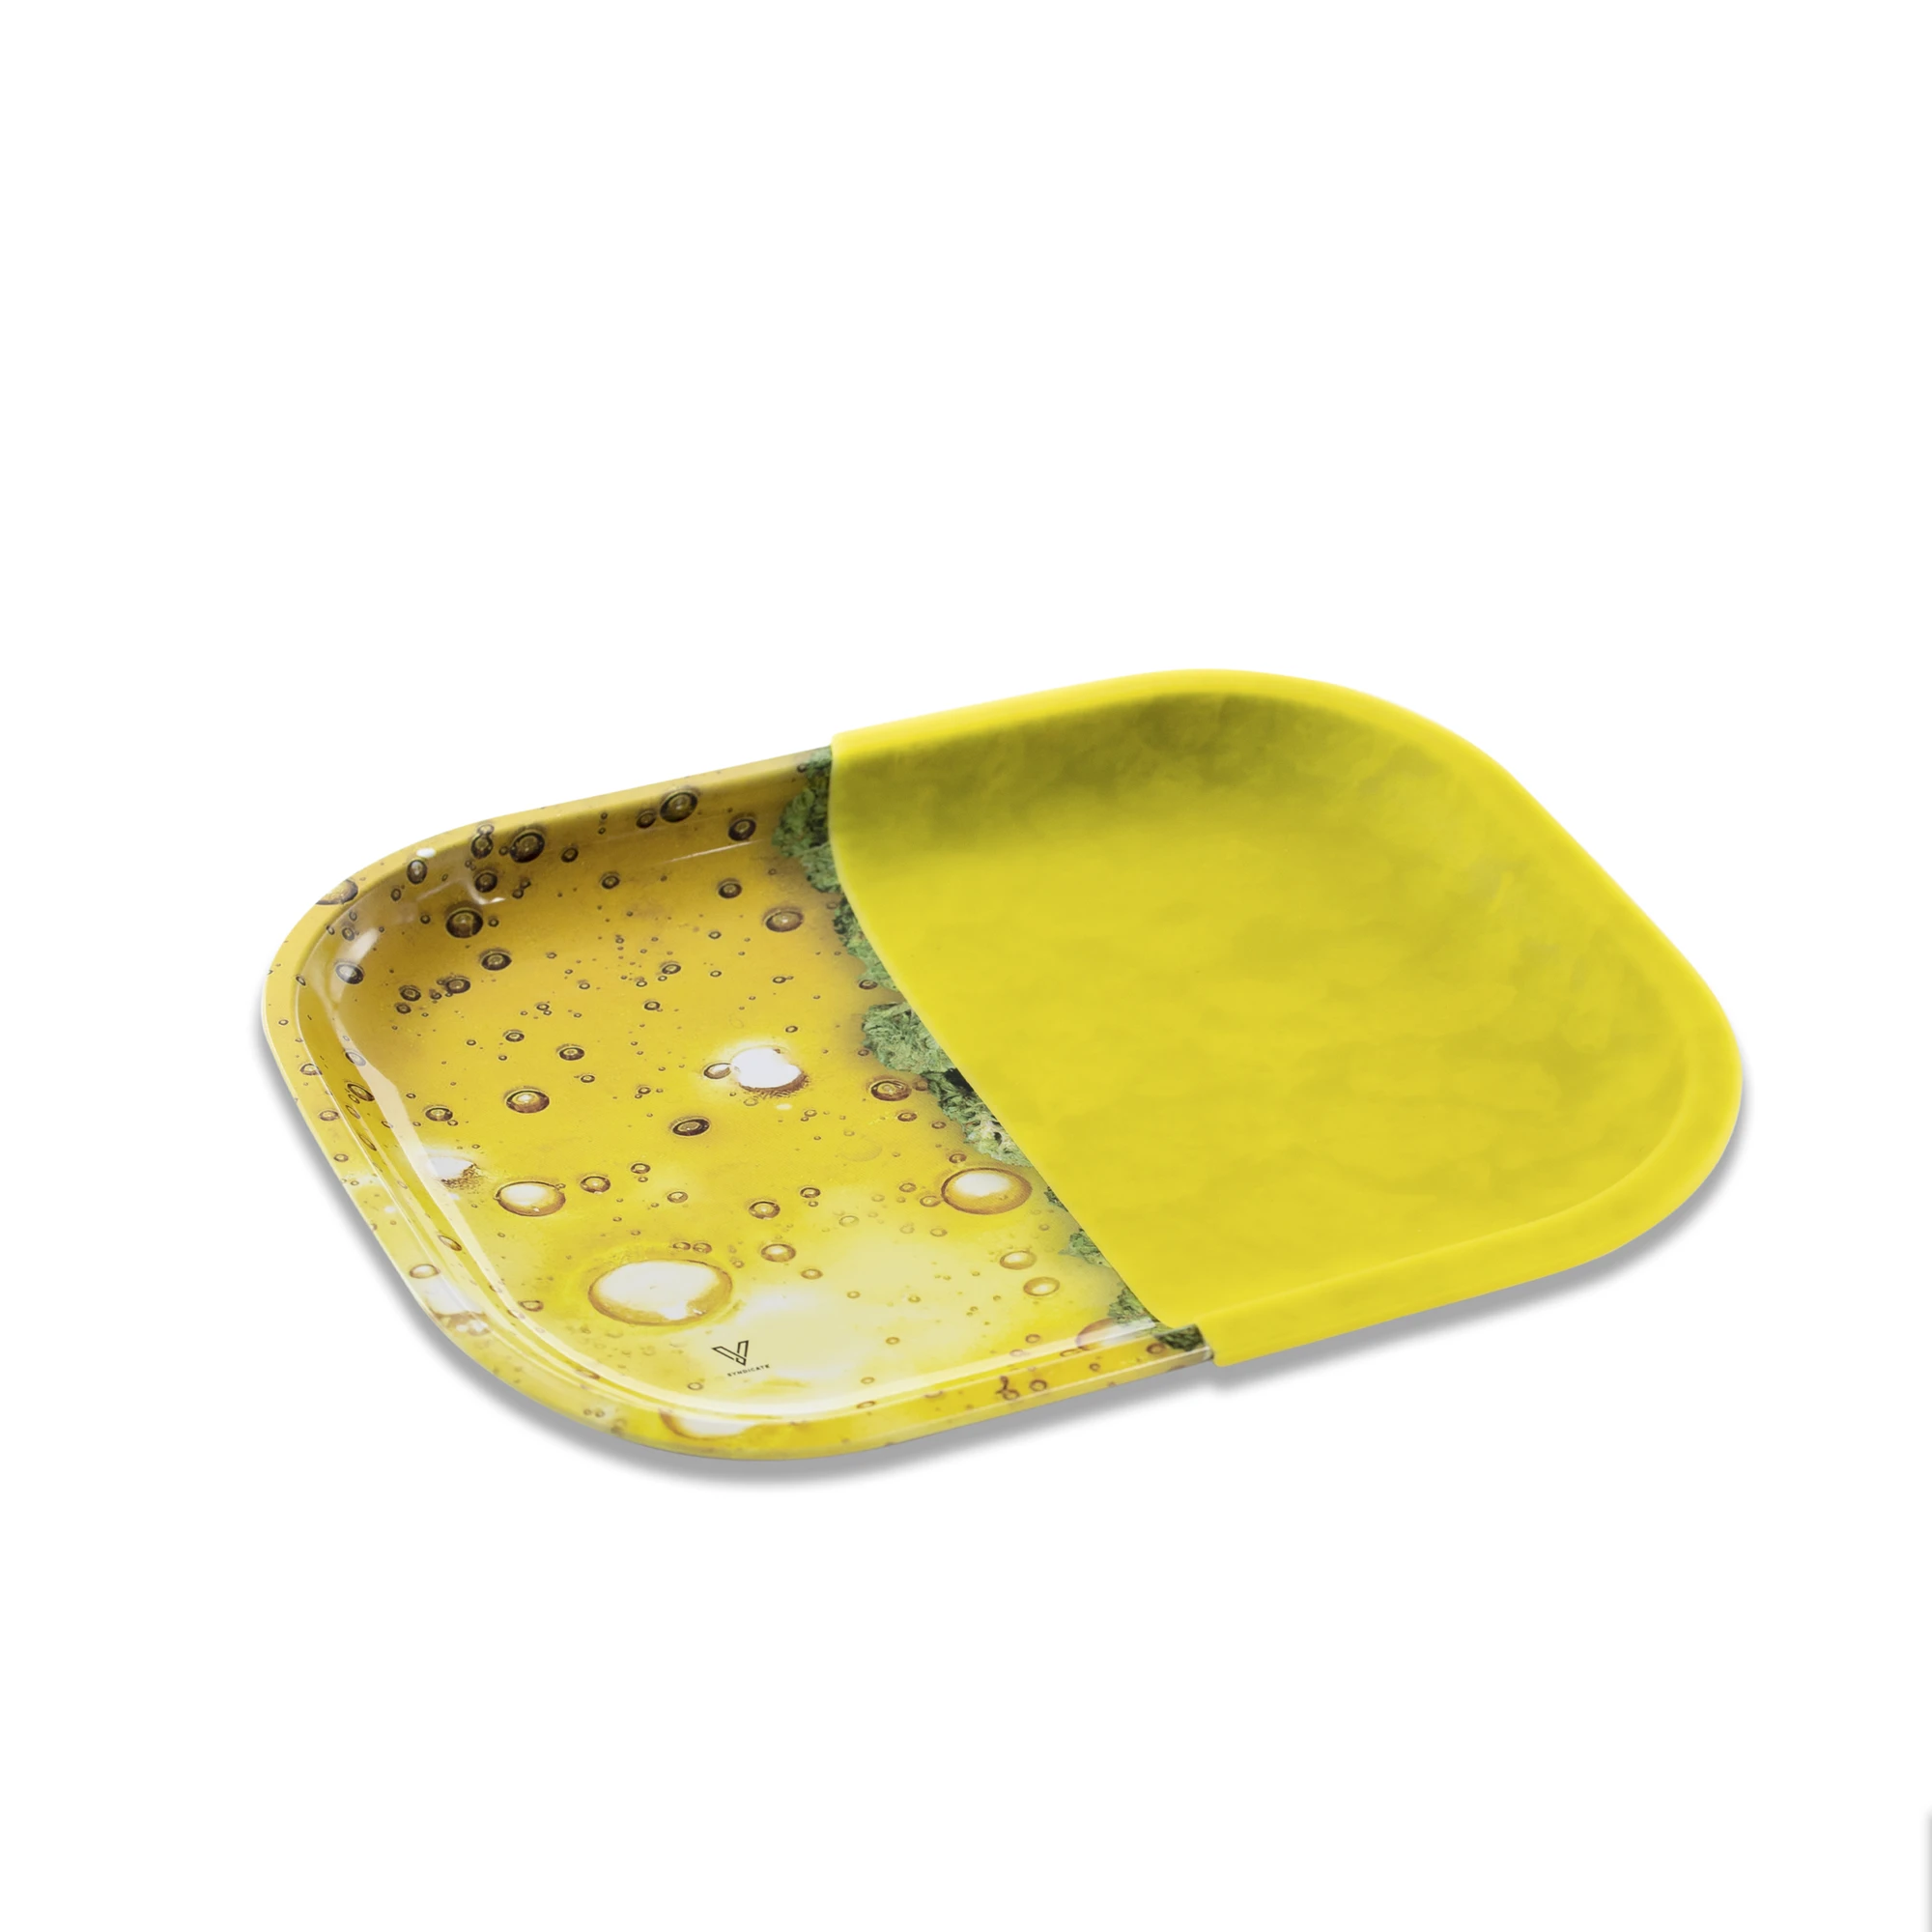 v syndicate hybrid rolling tray buds oil silicone mat